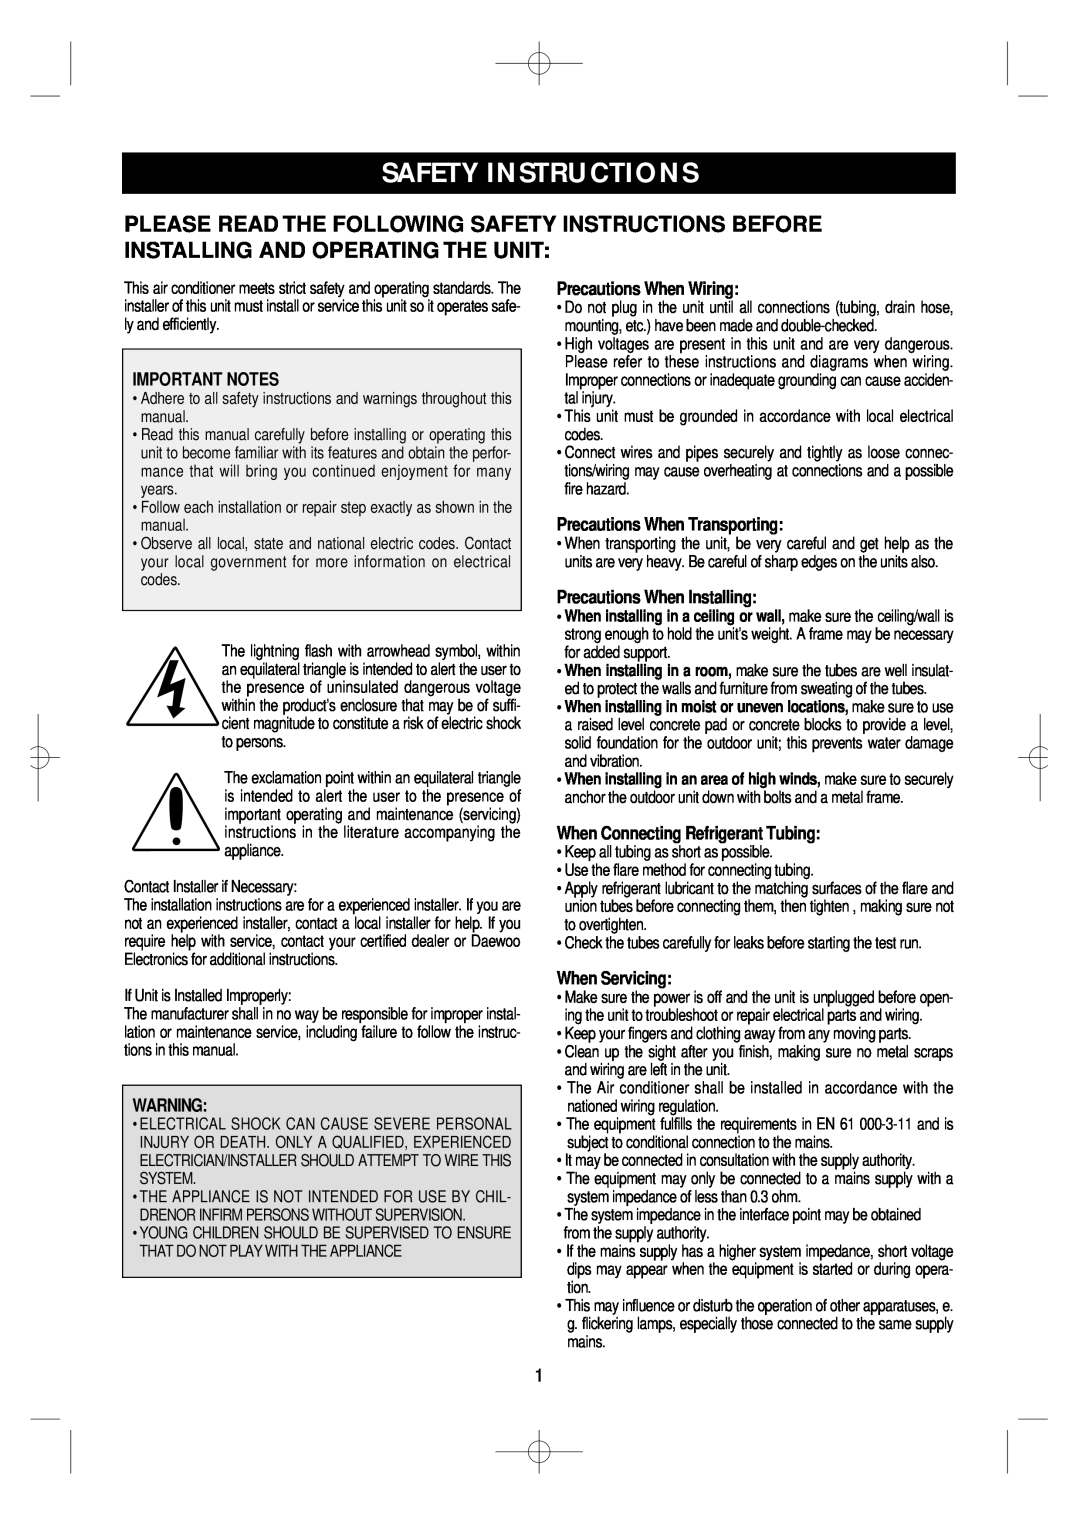 Daewoo DSB-F183L owner manual Safety Instructions, Important Notes, Precautions When Wiring, Precautions When Transporting 